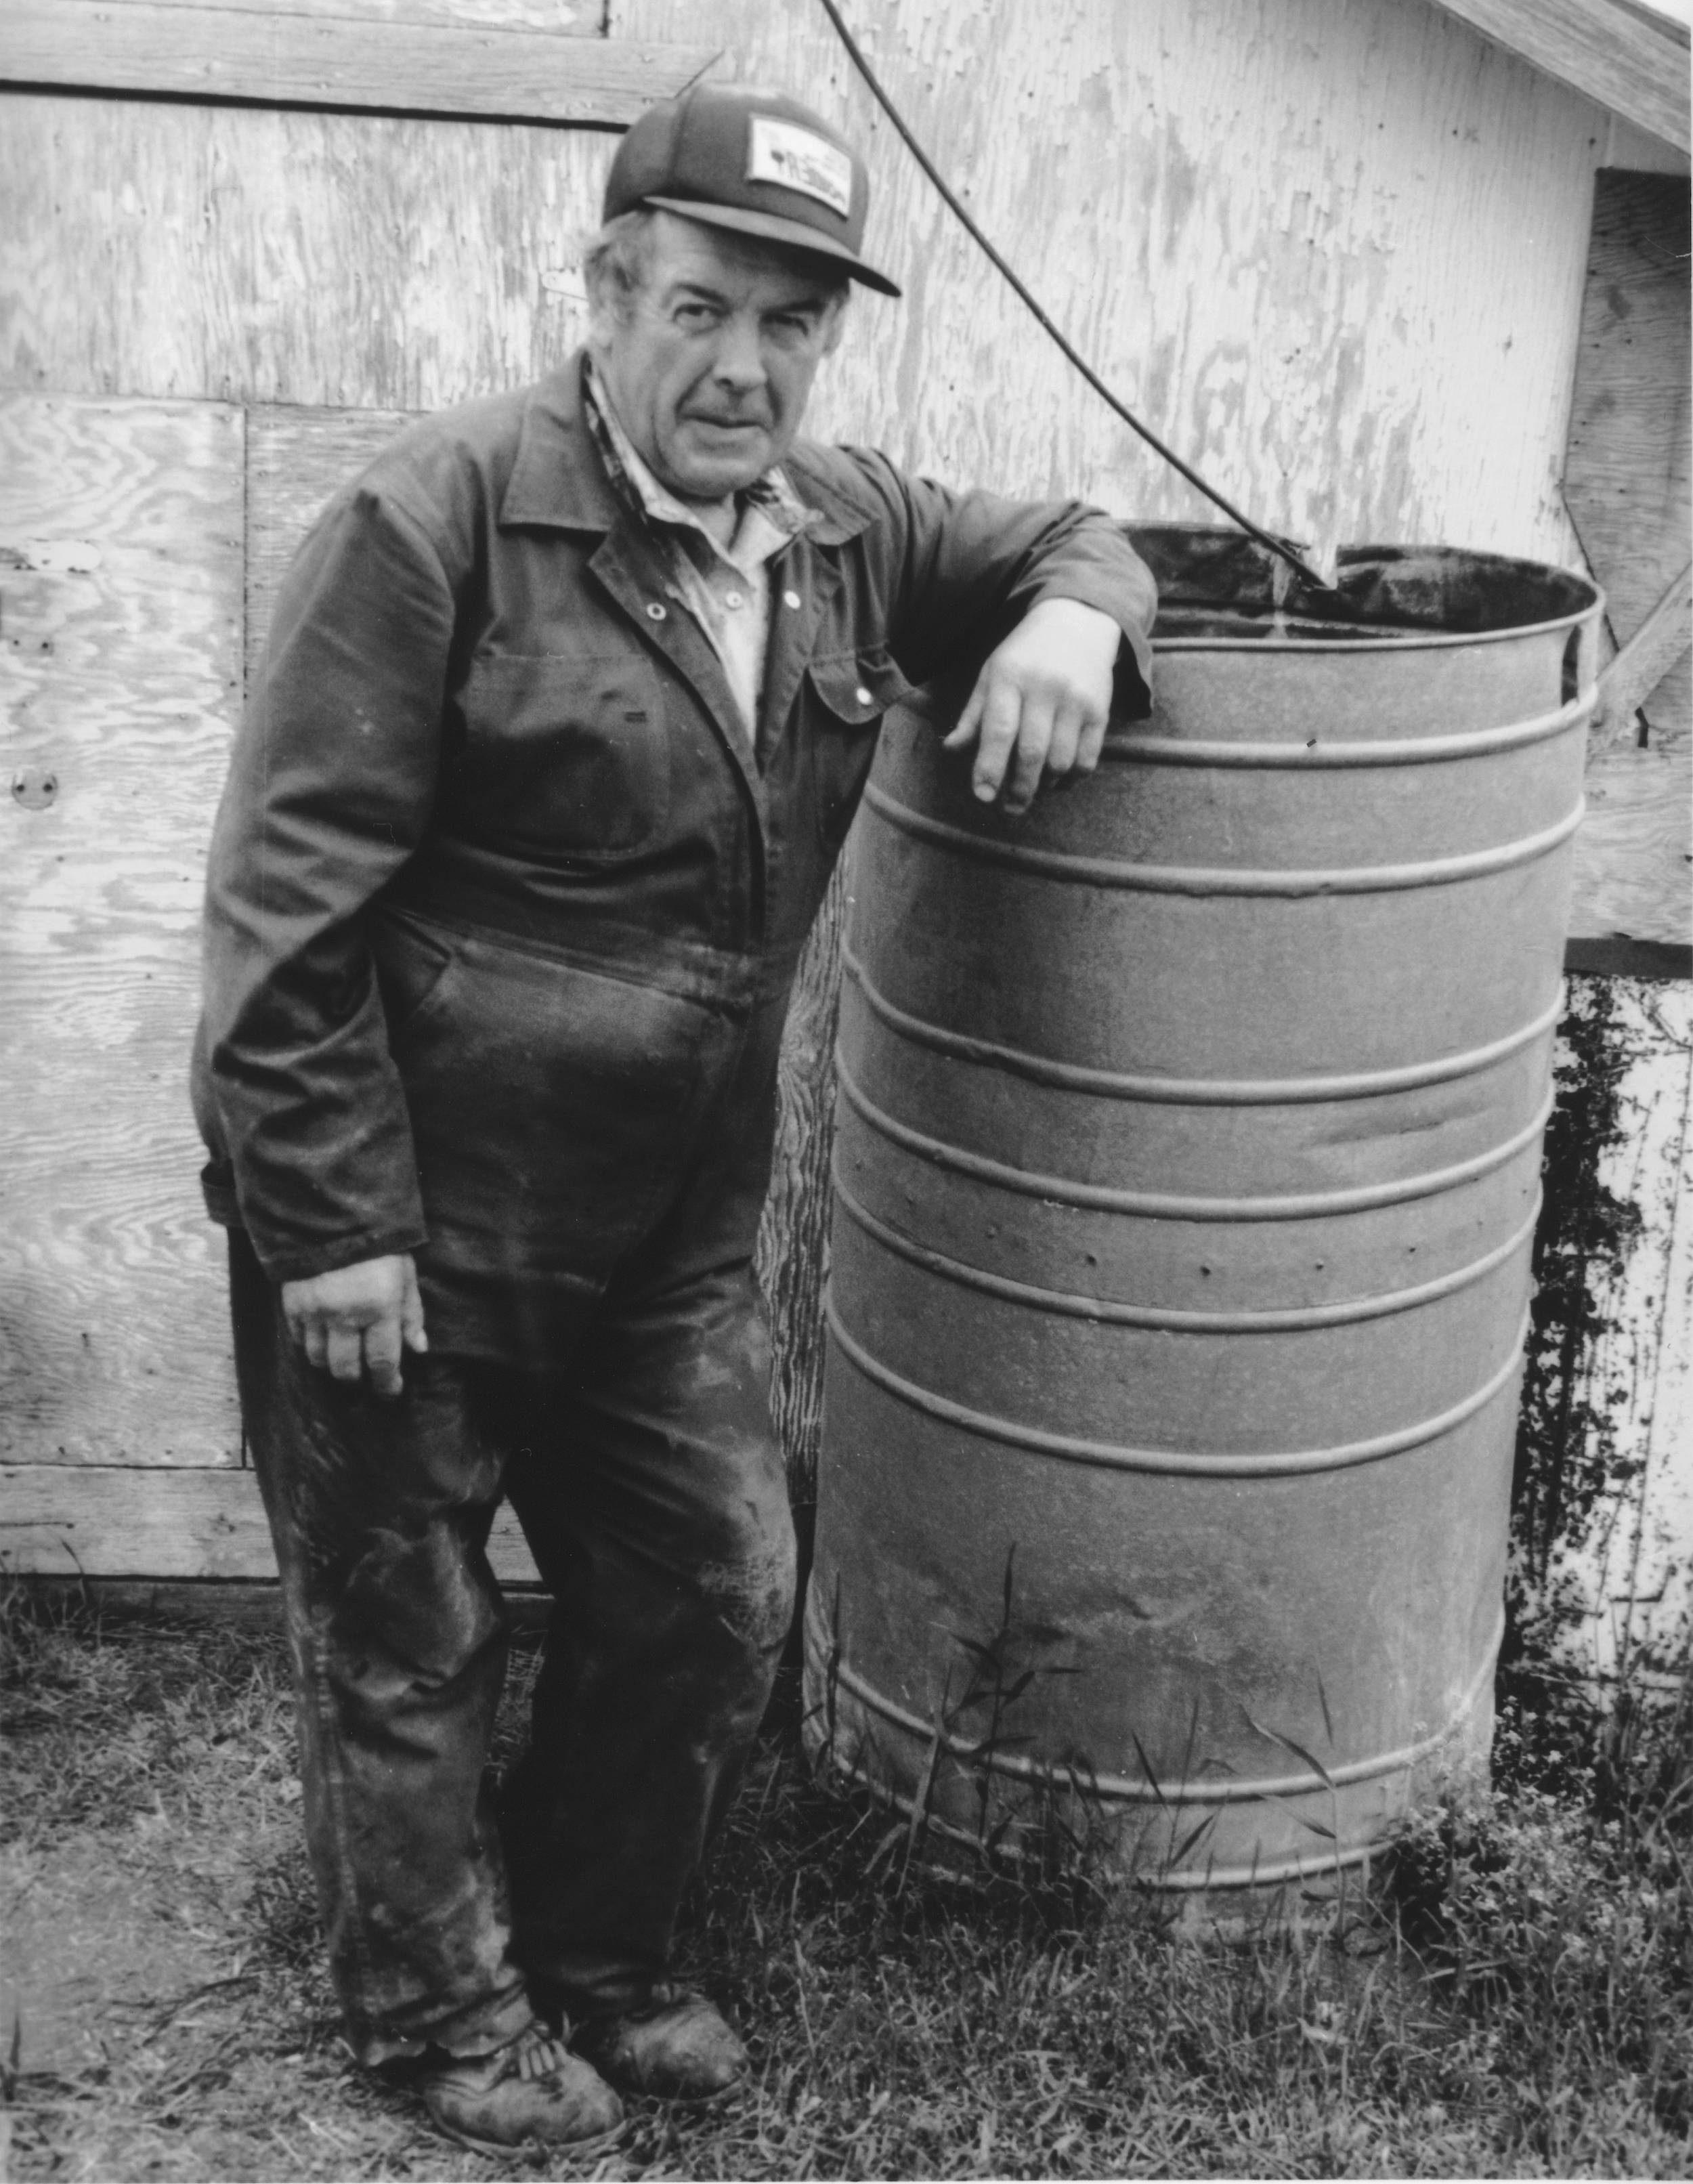 Black and white photo of elderly man leaning against an old metal barrel.